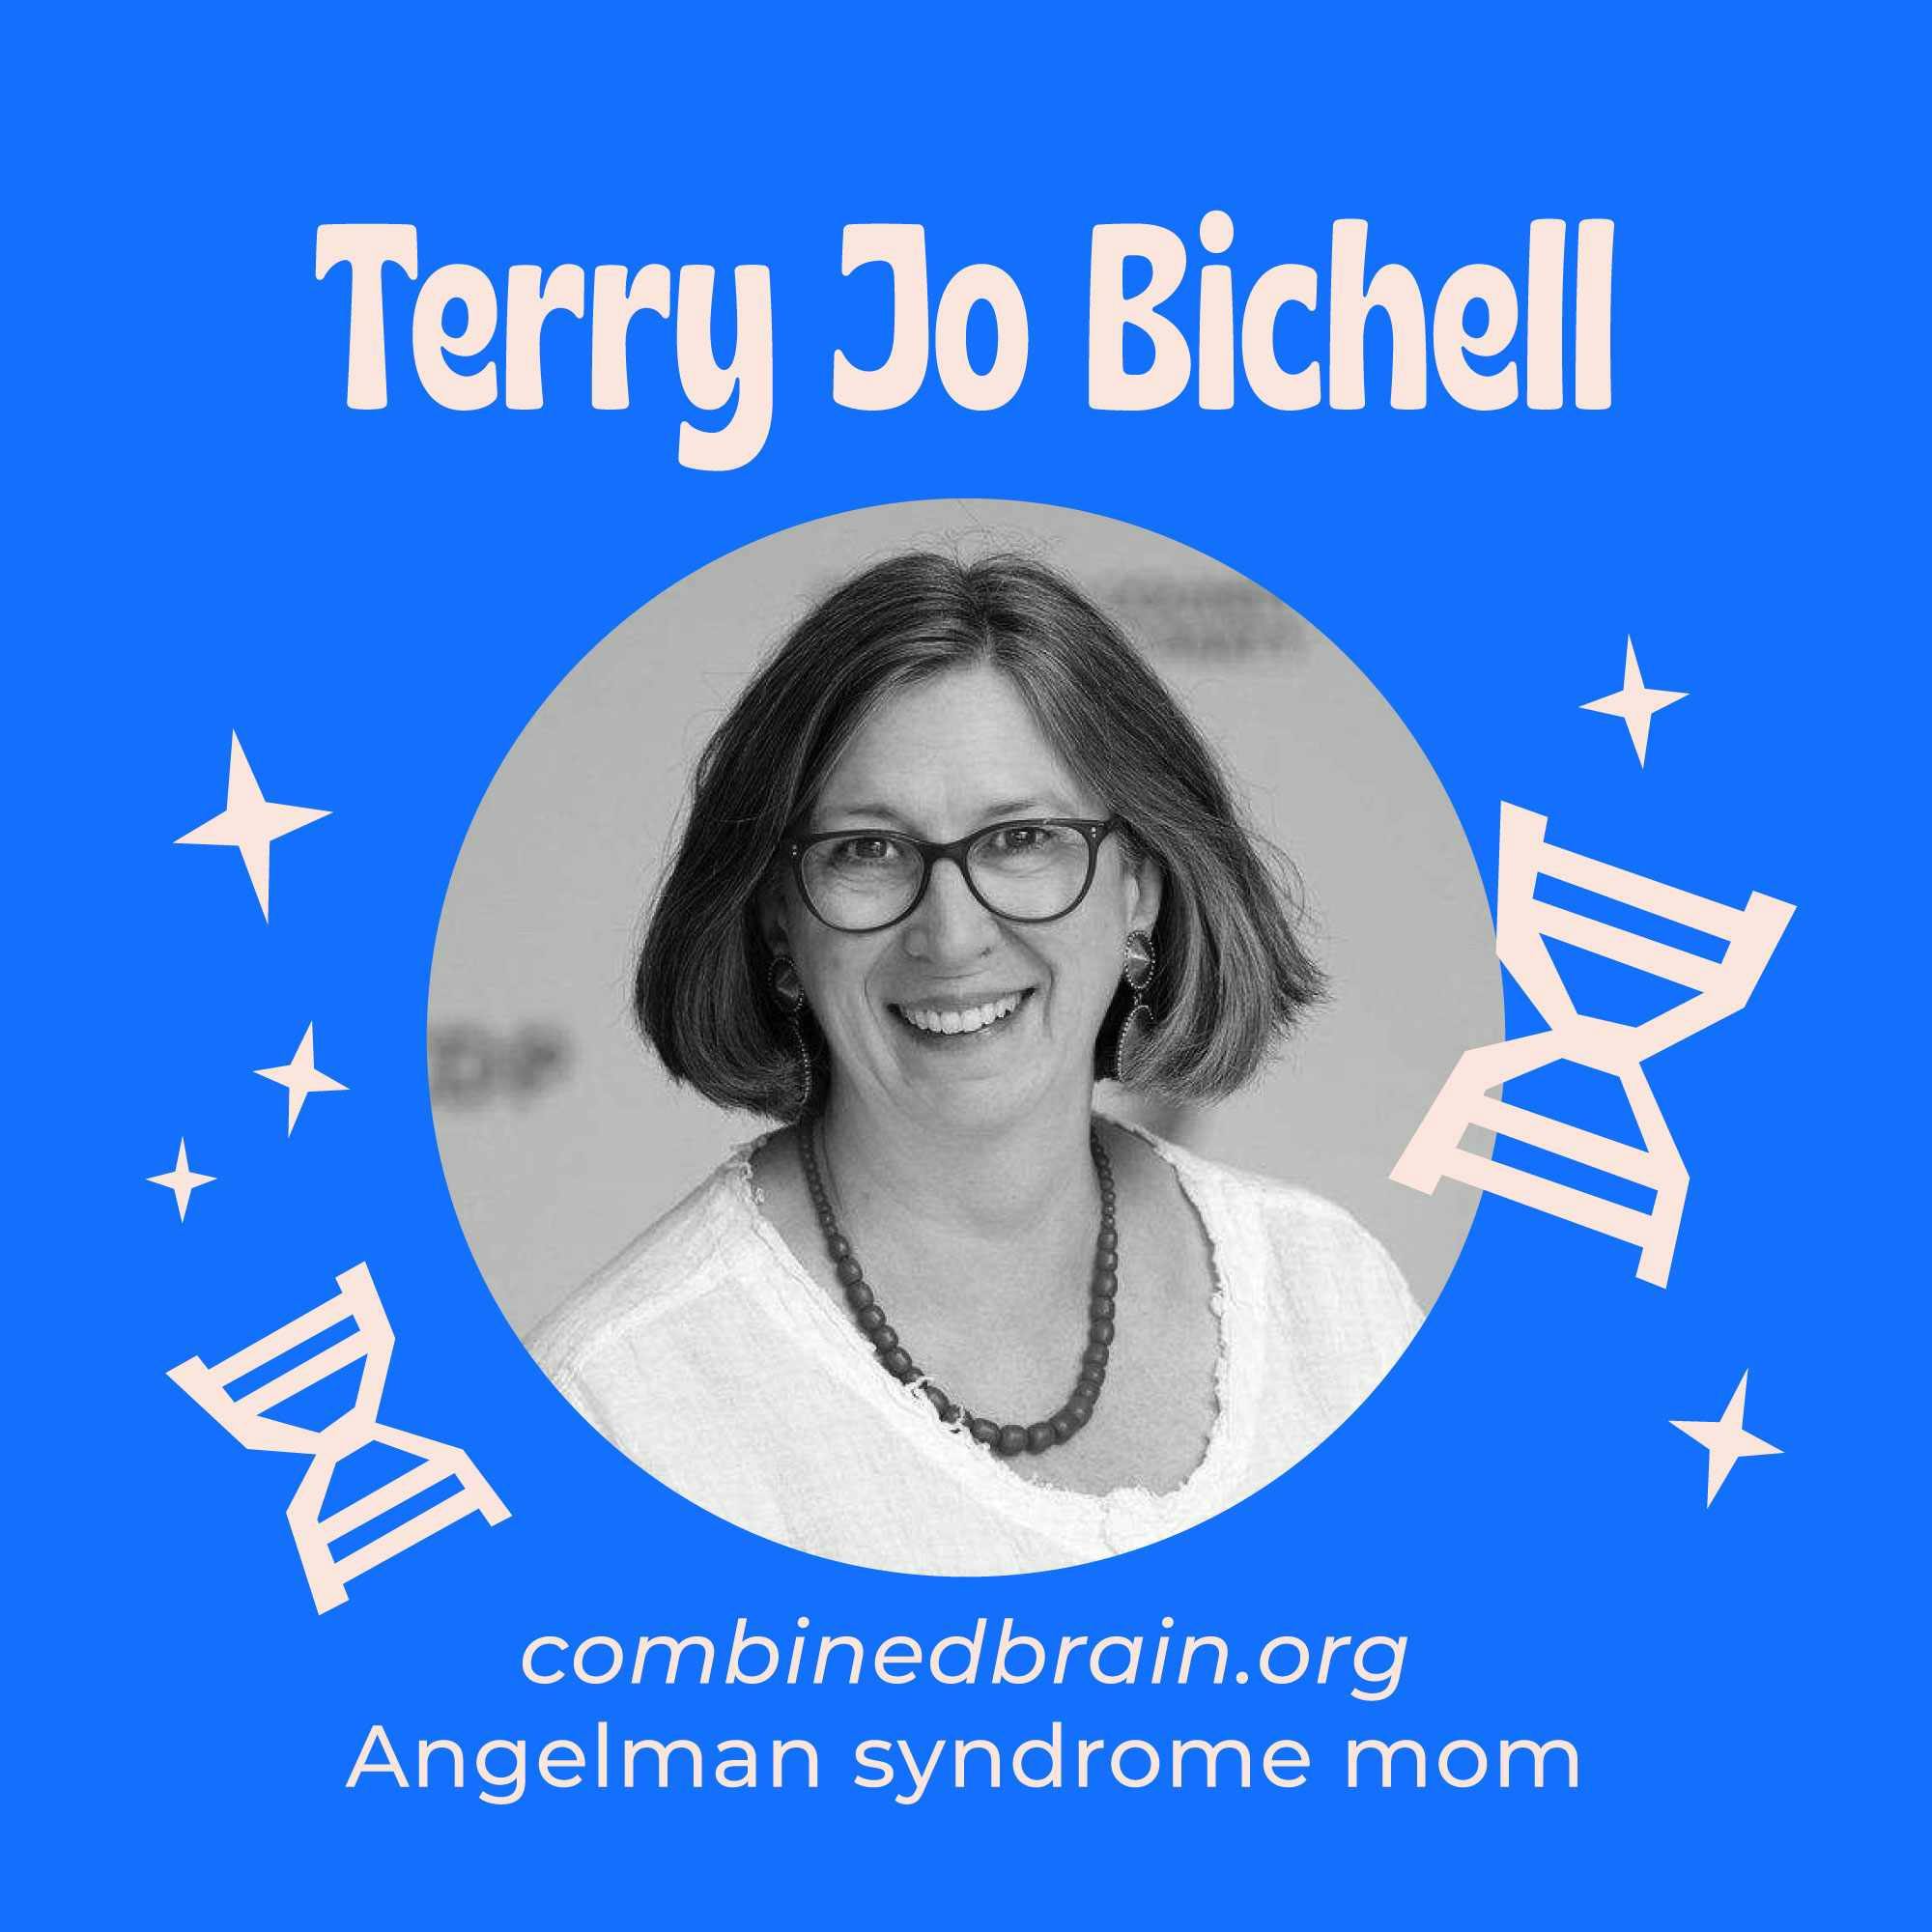 Uniting Science and Hope - COMBINEDBrain and it’s Quest to Transform Research and Treatment for Rare Genetic Neurodevelopmental Disorders with Terry Jo Bichell